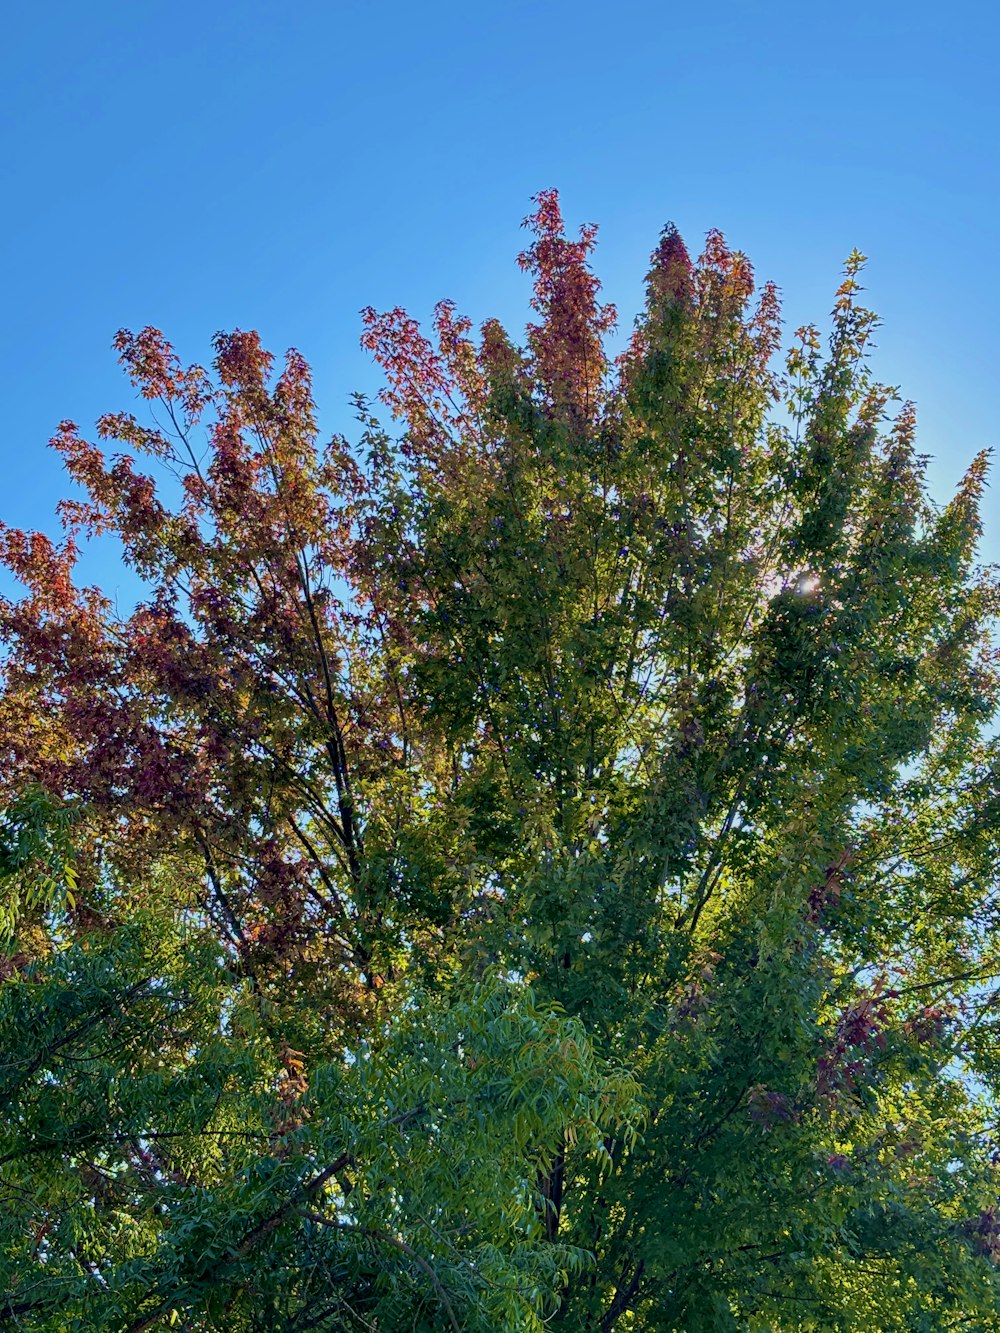 a tree with red and green leaves and a blue sky in the background